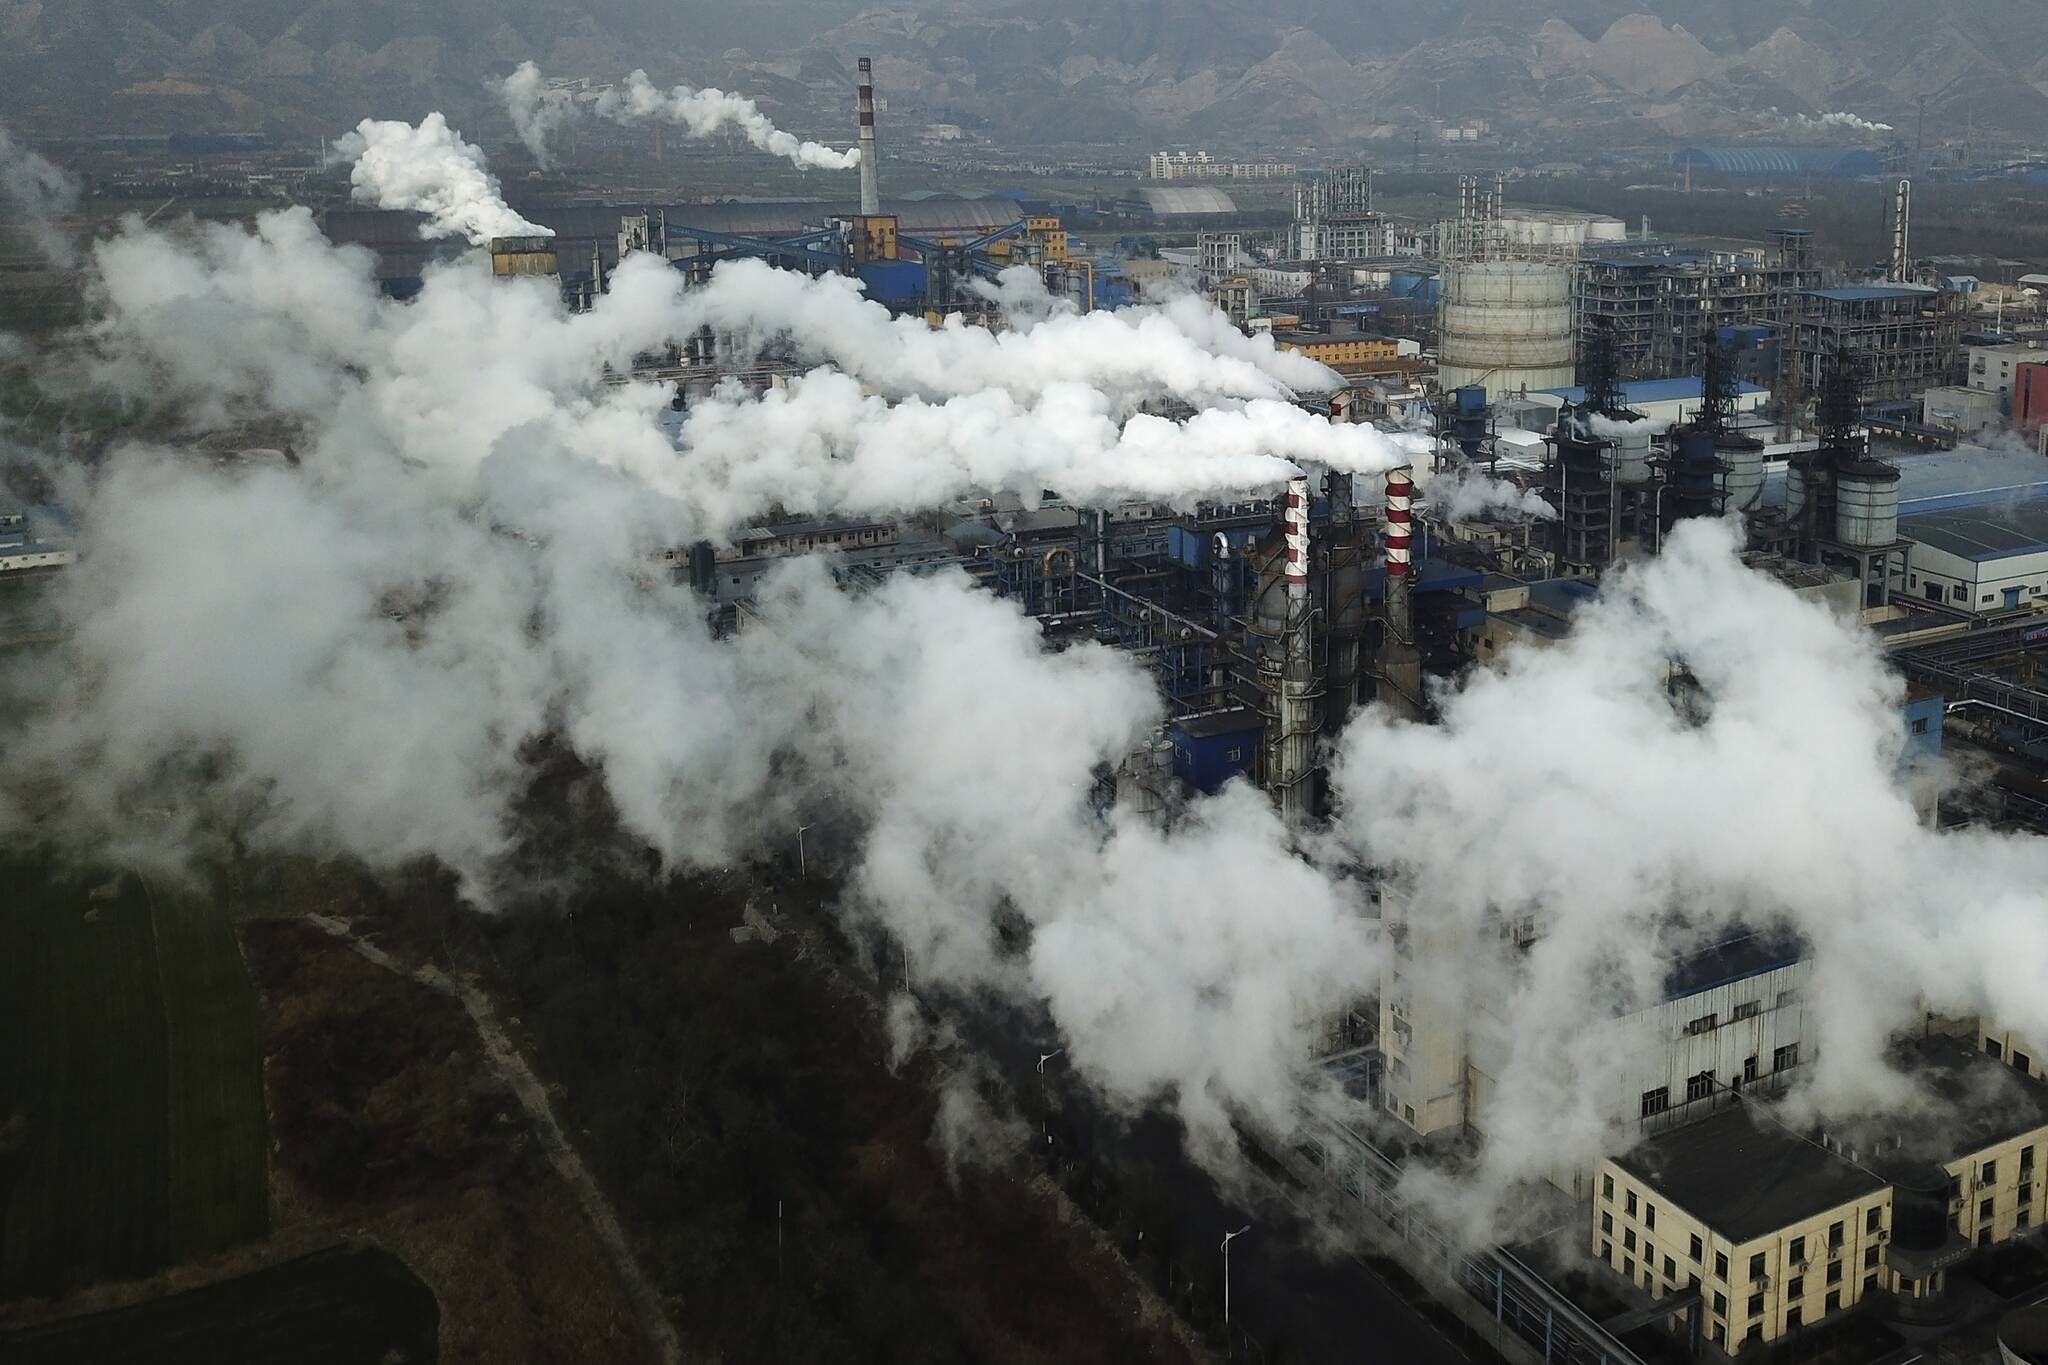 Smoke and steam rise from a coal processing plant in Hejin in central China’s Shanxi Province on Nov. 28, 2019. A study released on Tuesday, May 17, 2022, blames pollution of all types for 9 million deaths a year globally, with the death toll attributed to dirty air from cars, trucks and industry rising 55% since 2000. (AP Photo / Sam McNeil File)